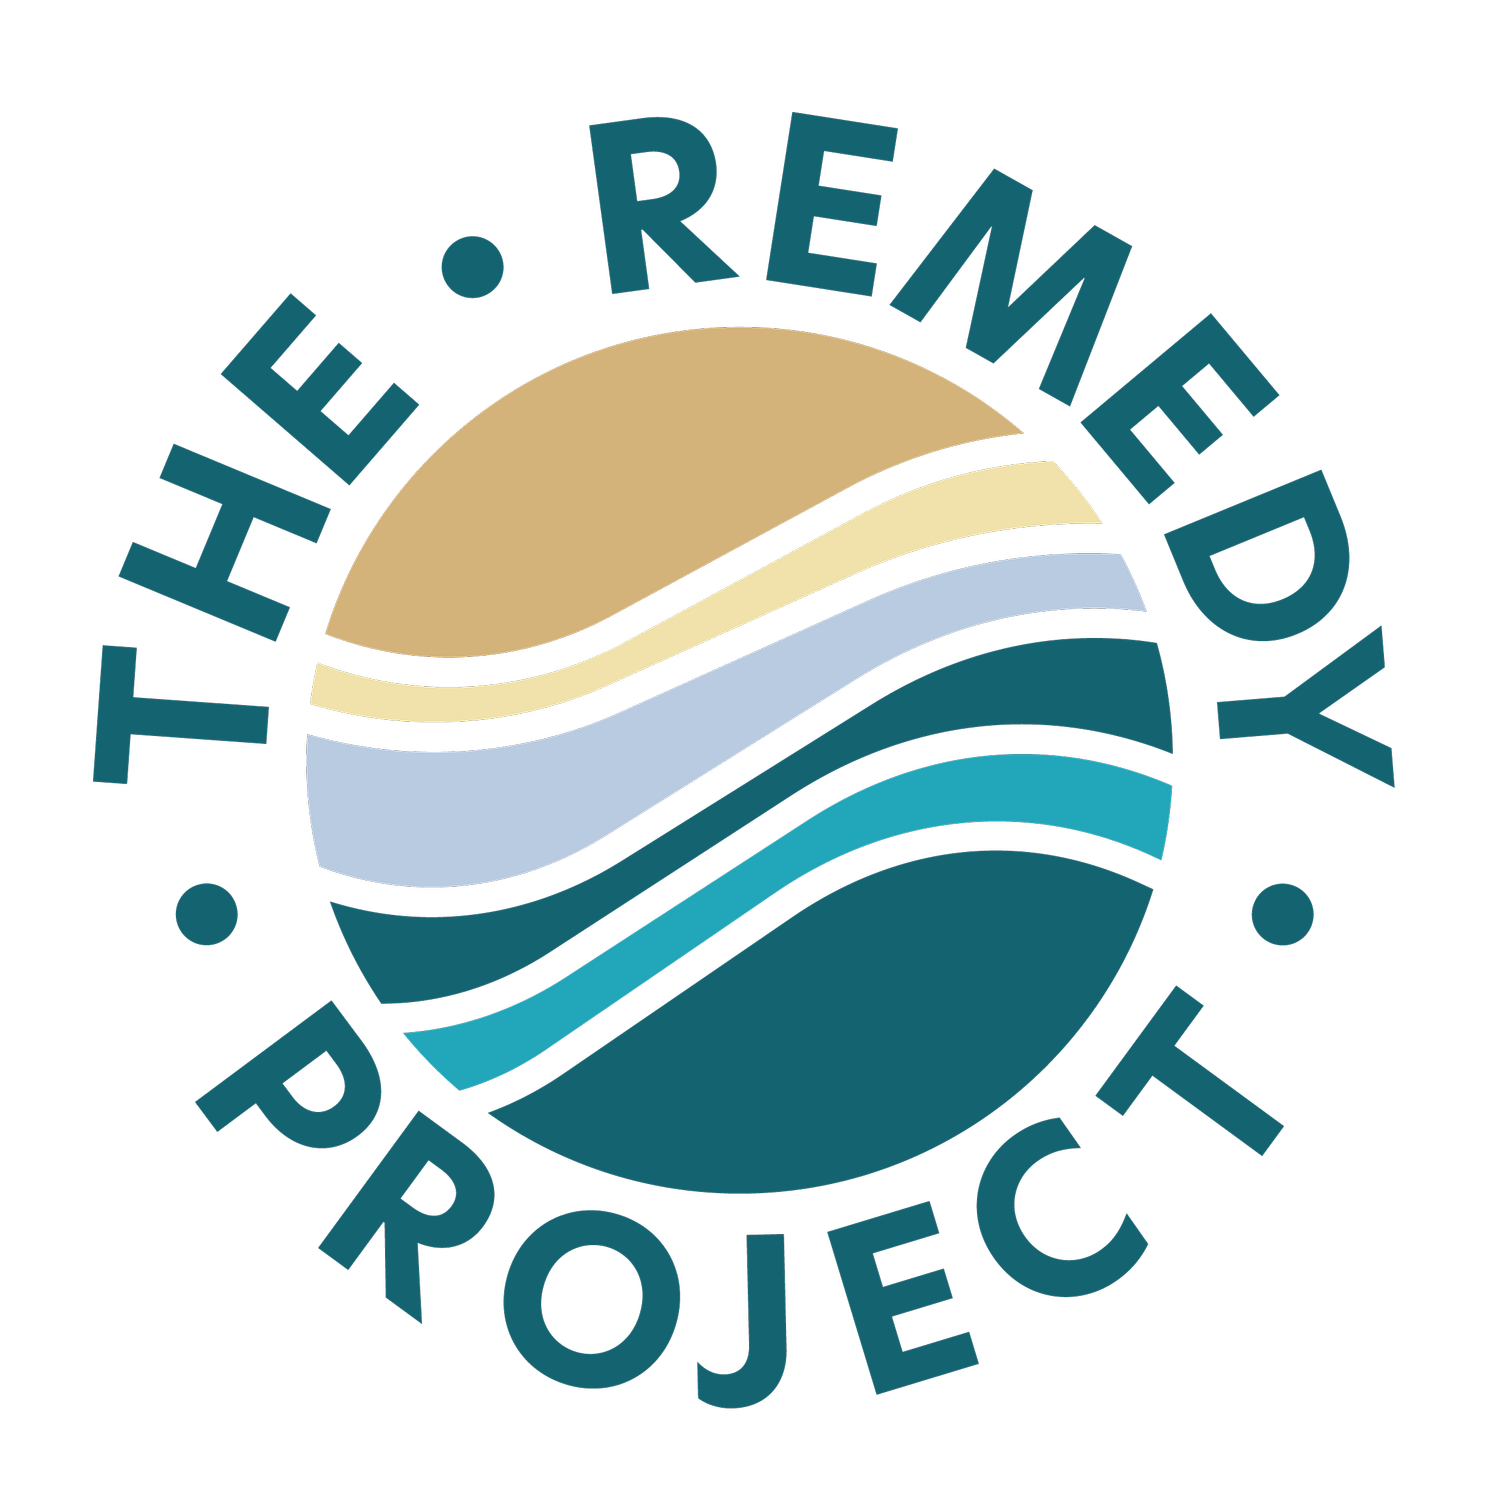 The Remedy Project